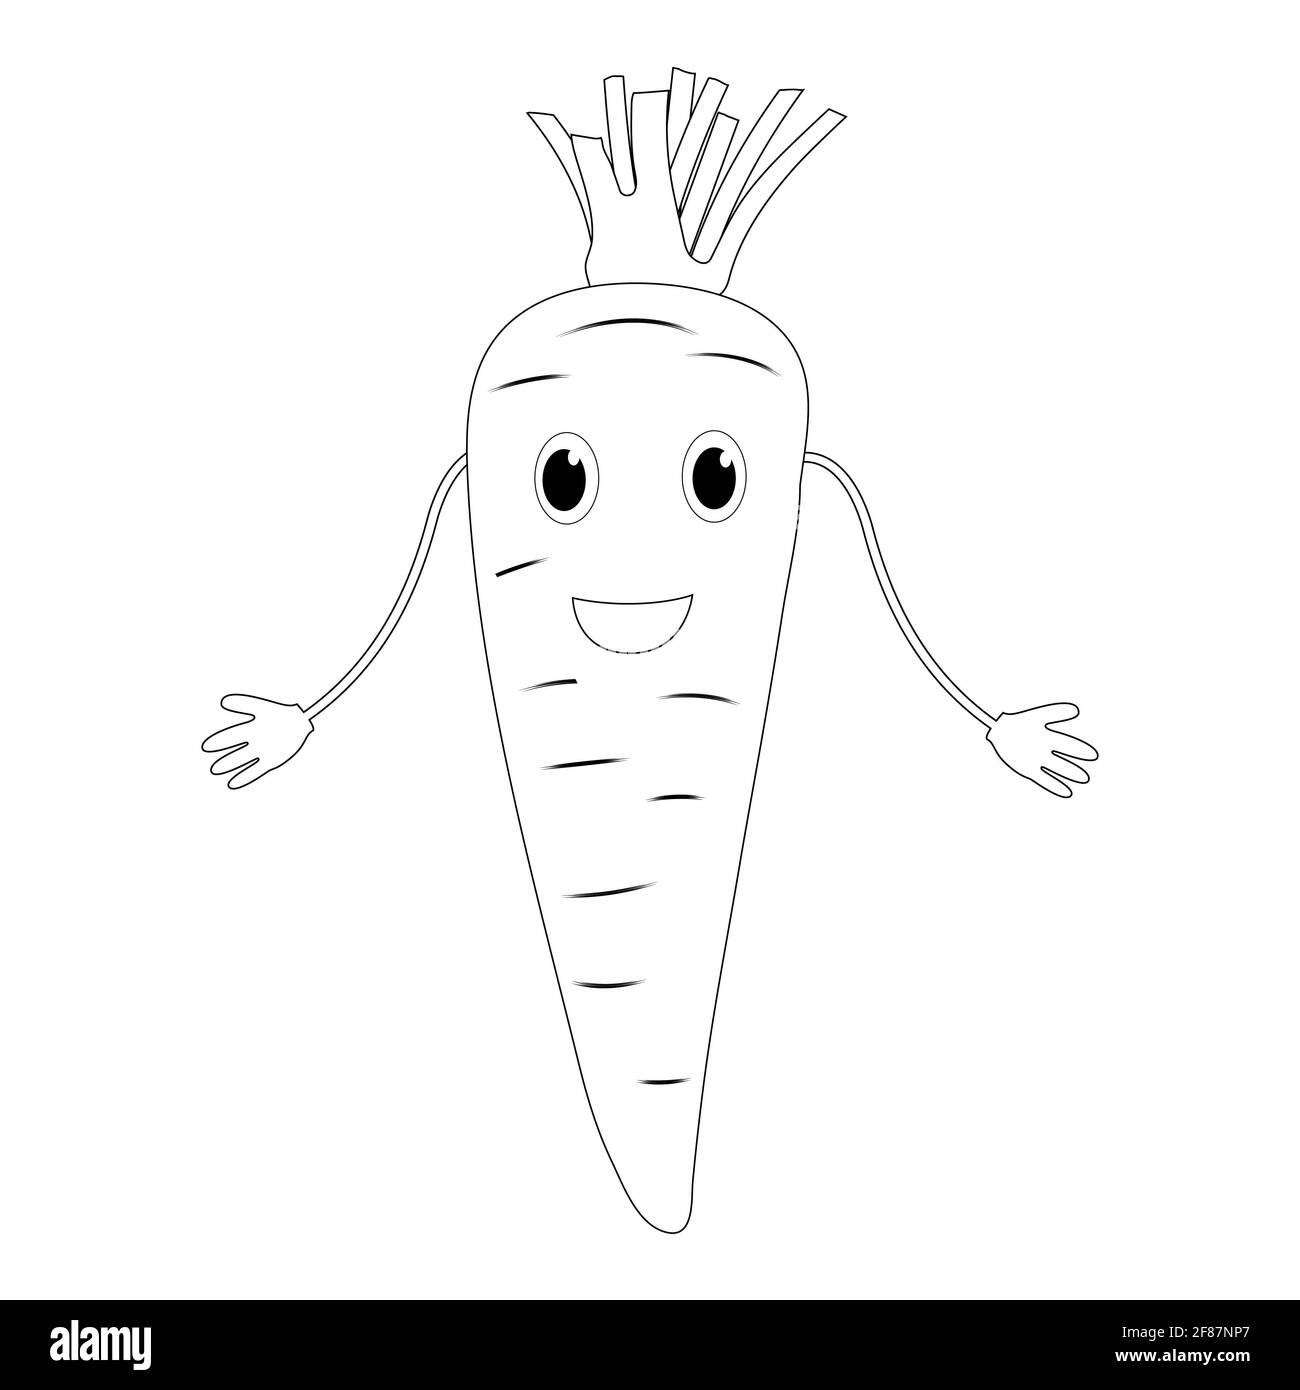 Enthusiastic carrot is a cartoon style character. Isolated, white. Carrot with face.Illustration Stock Photo